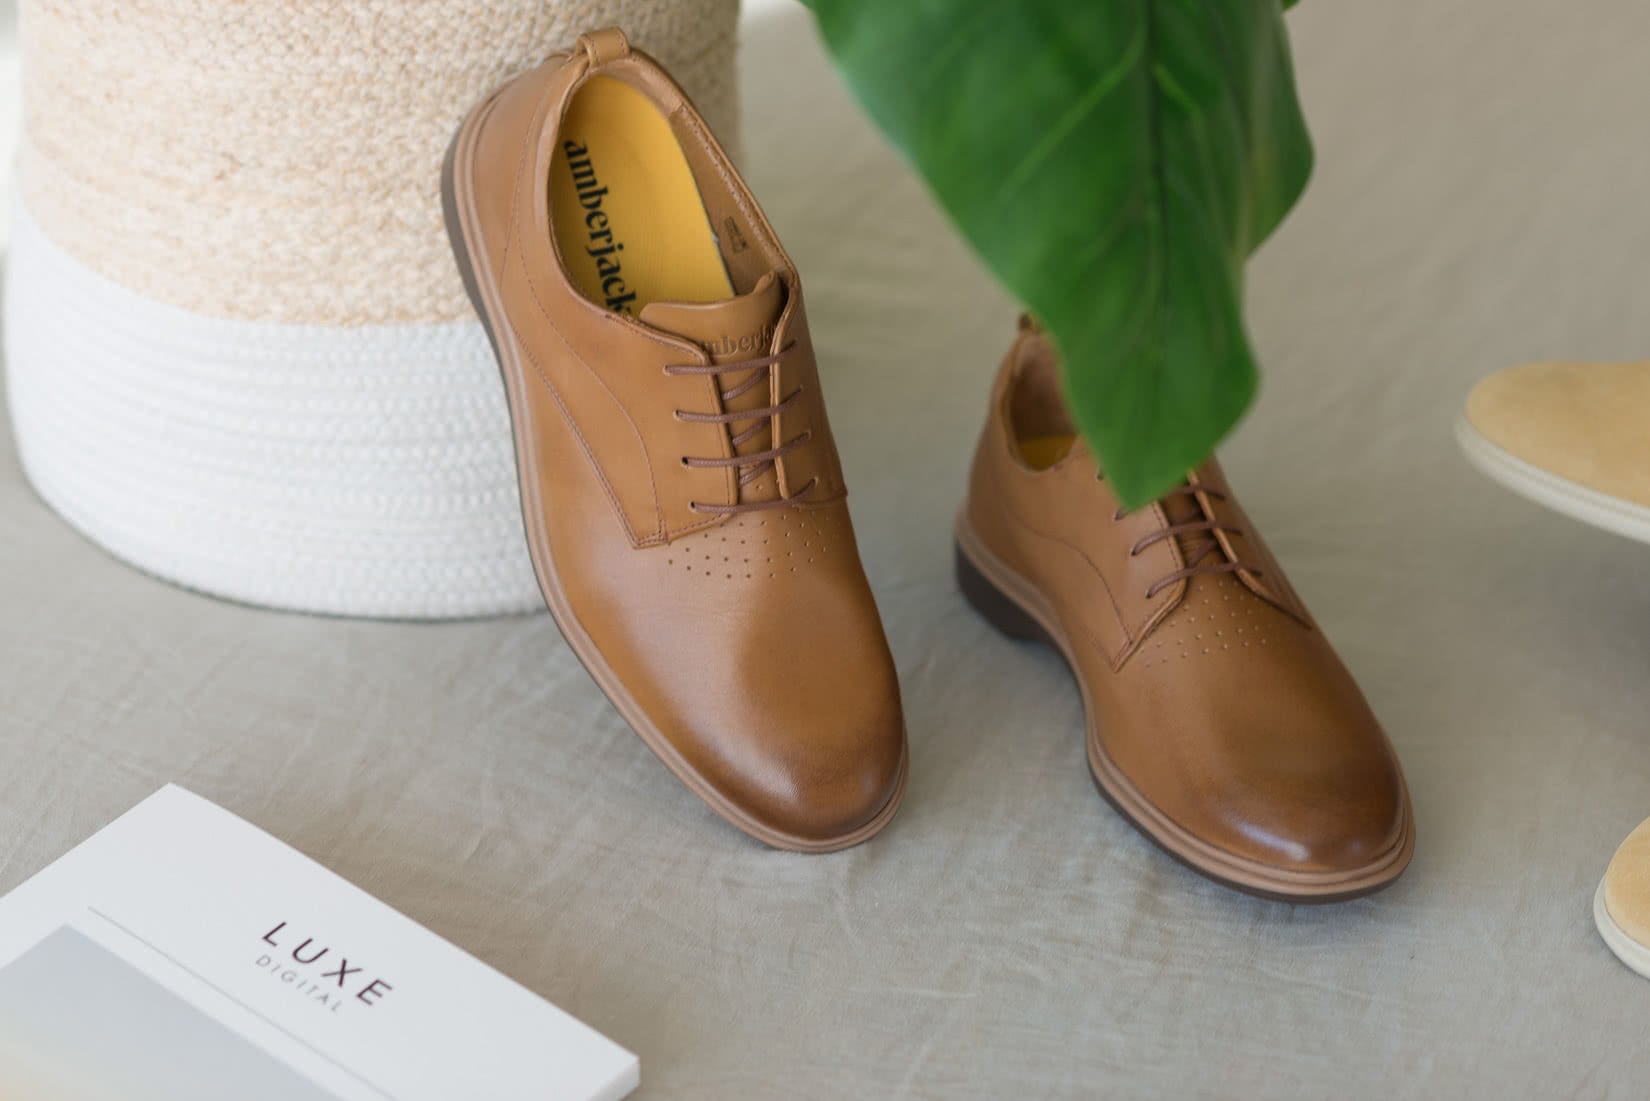 Amberjack dress shoes review - Luxe Digital